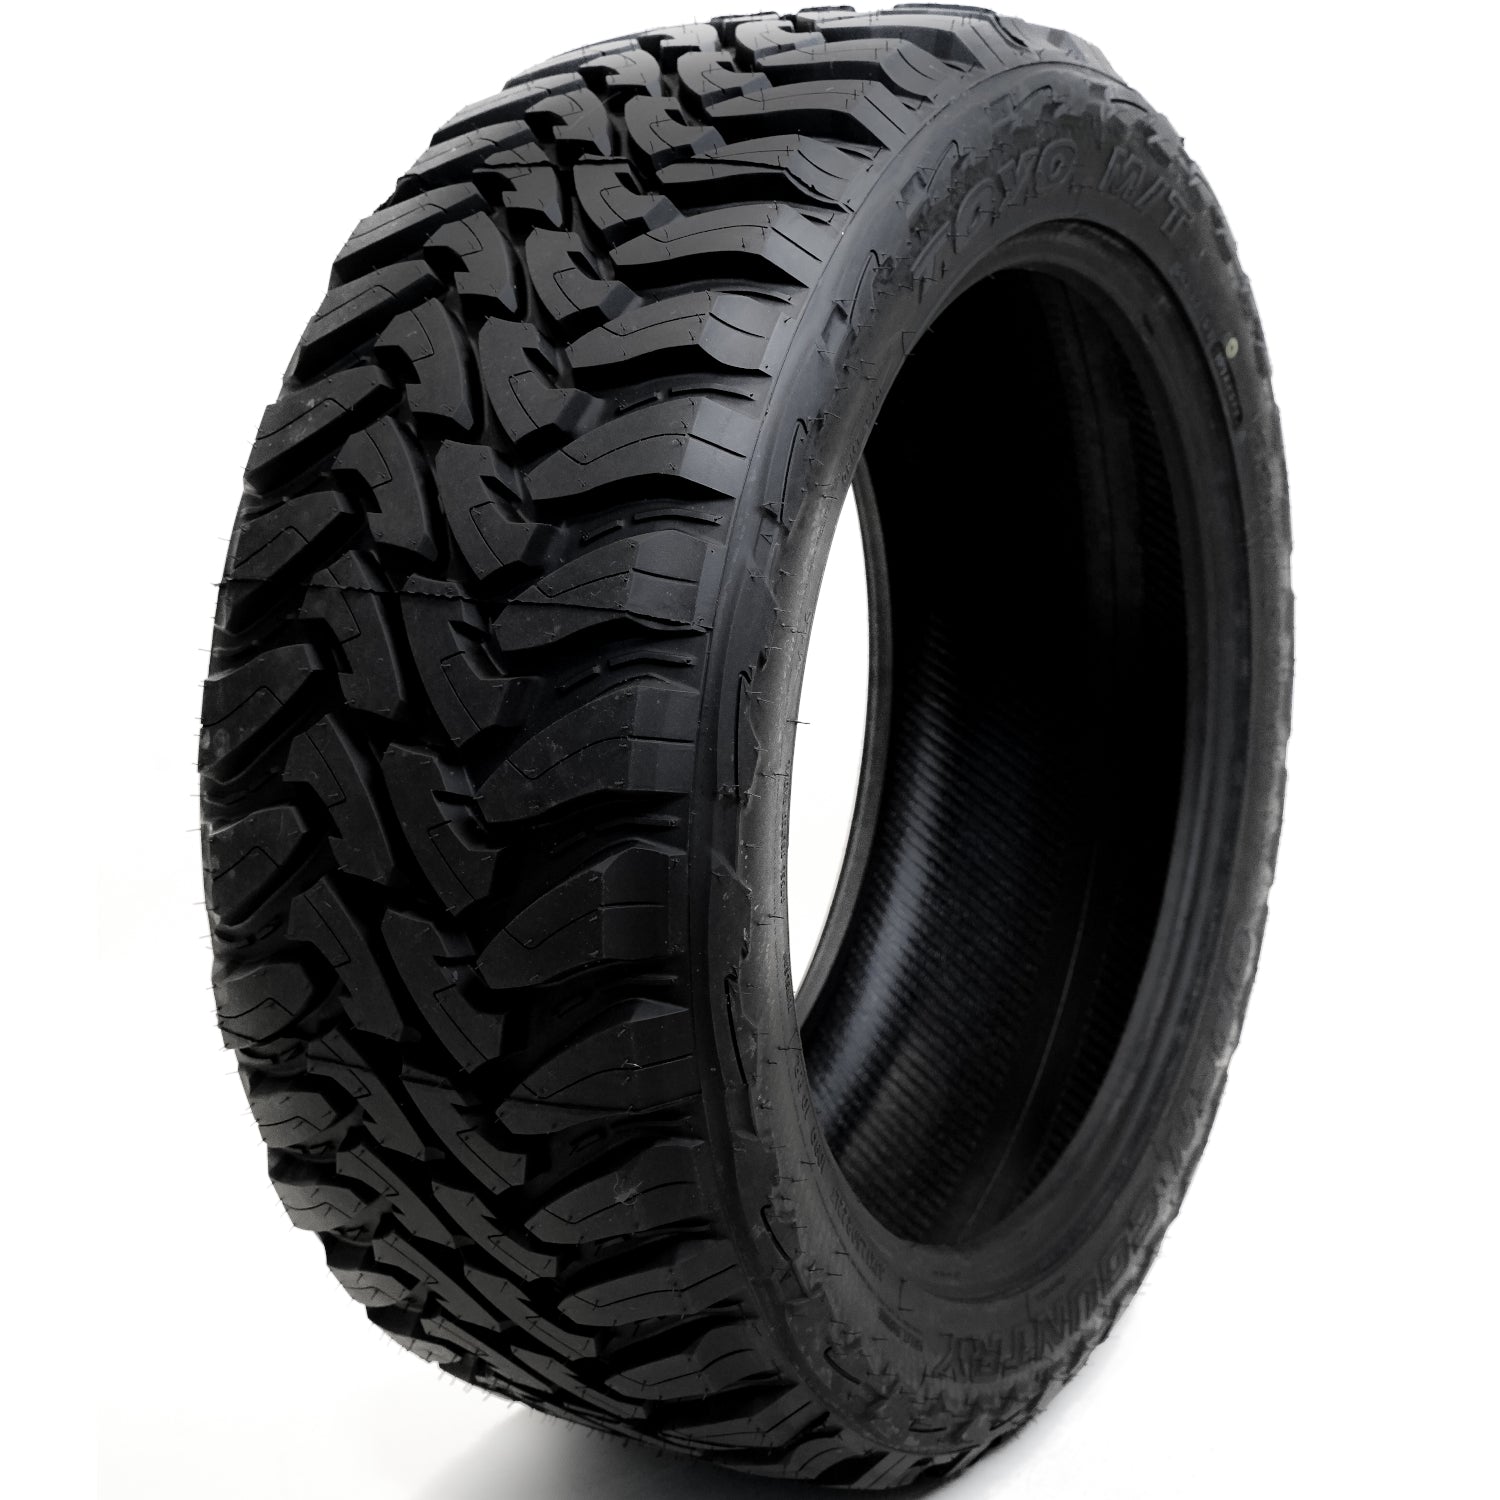 TOYO TIRES OPEN COUNTRY M/T 37X13.50R24LT Tires